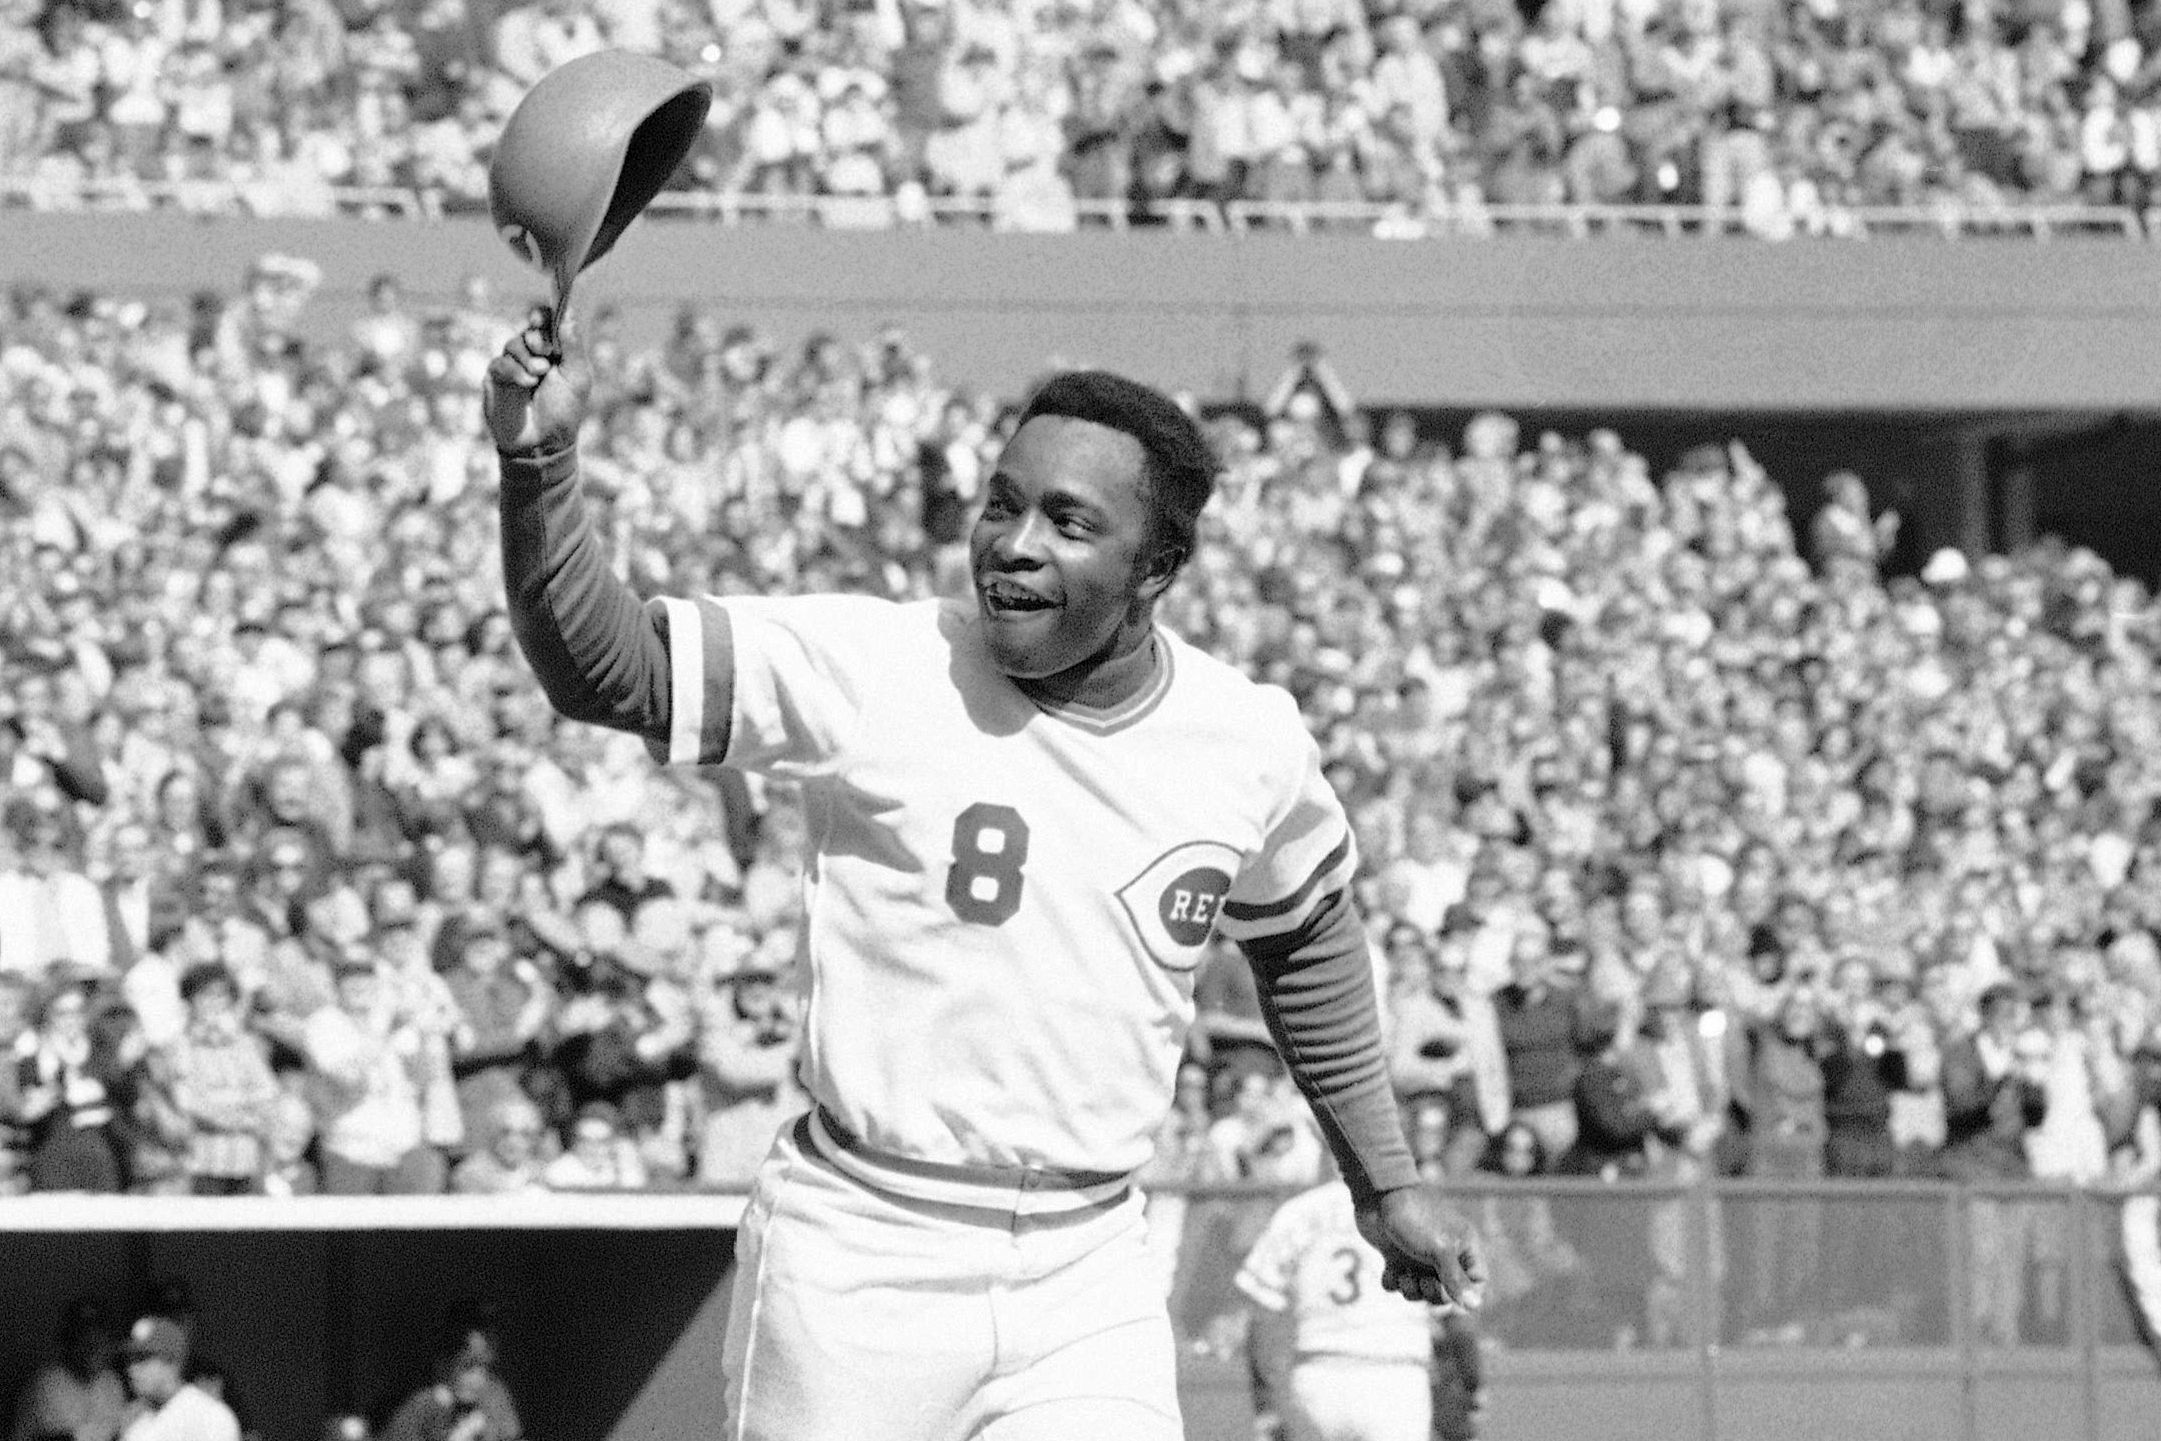 Lou Brock, Baseball Hall of Famer Known for Stealing Bases, Dies